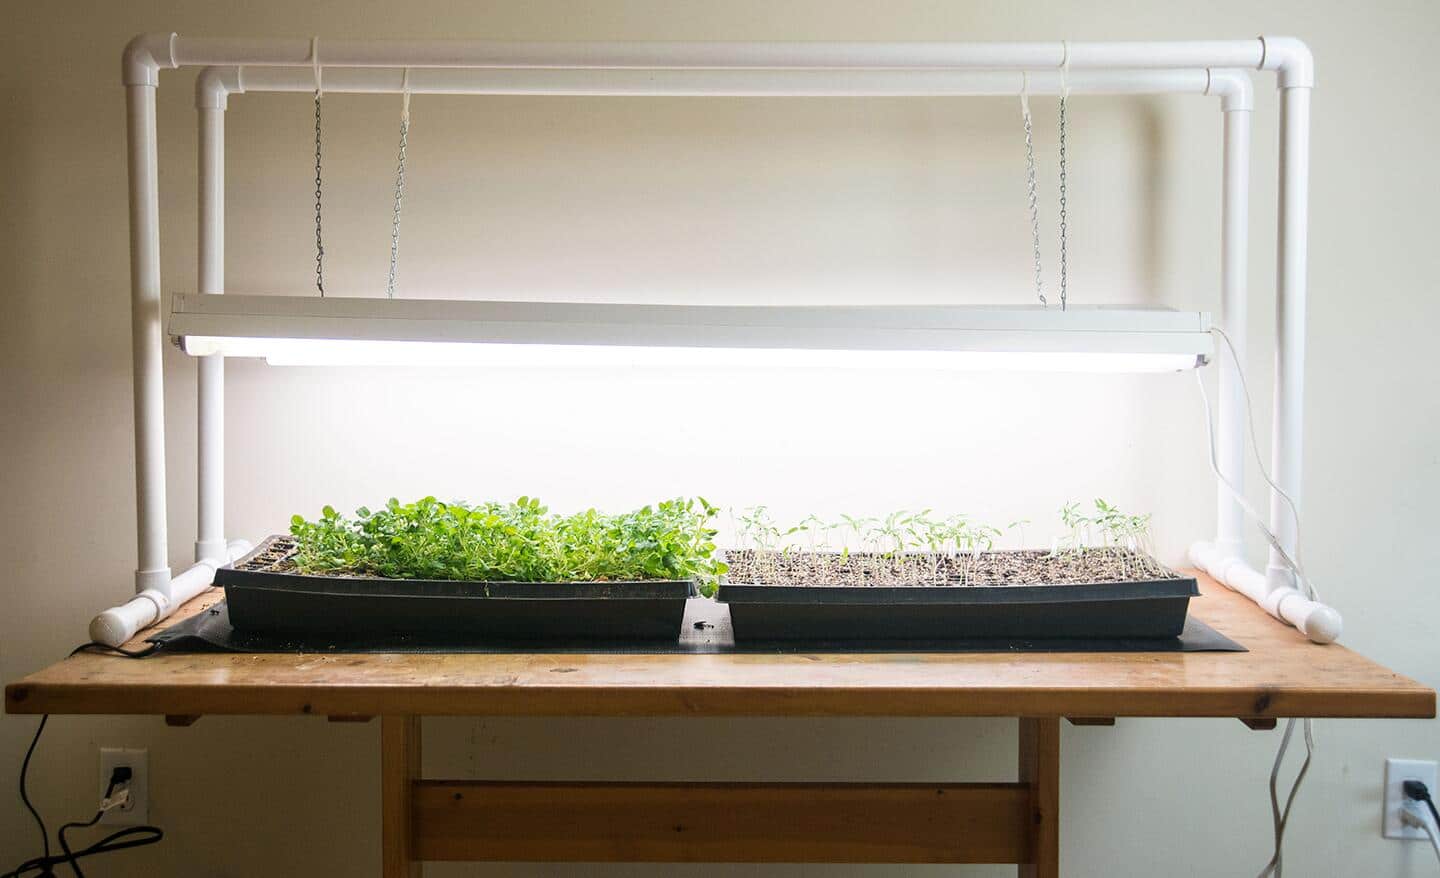 A seed starting station made with PVC pipe and grow lights